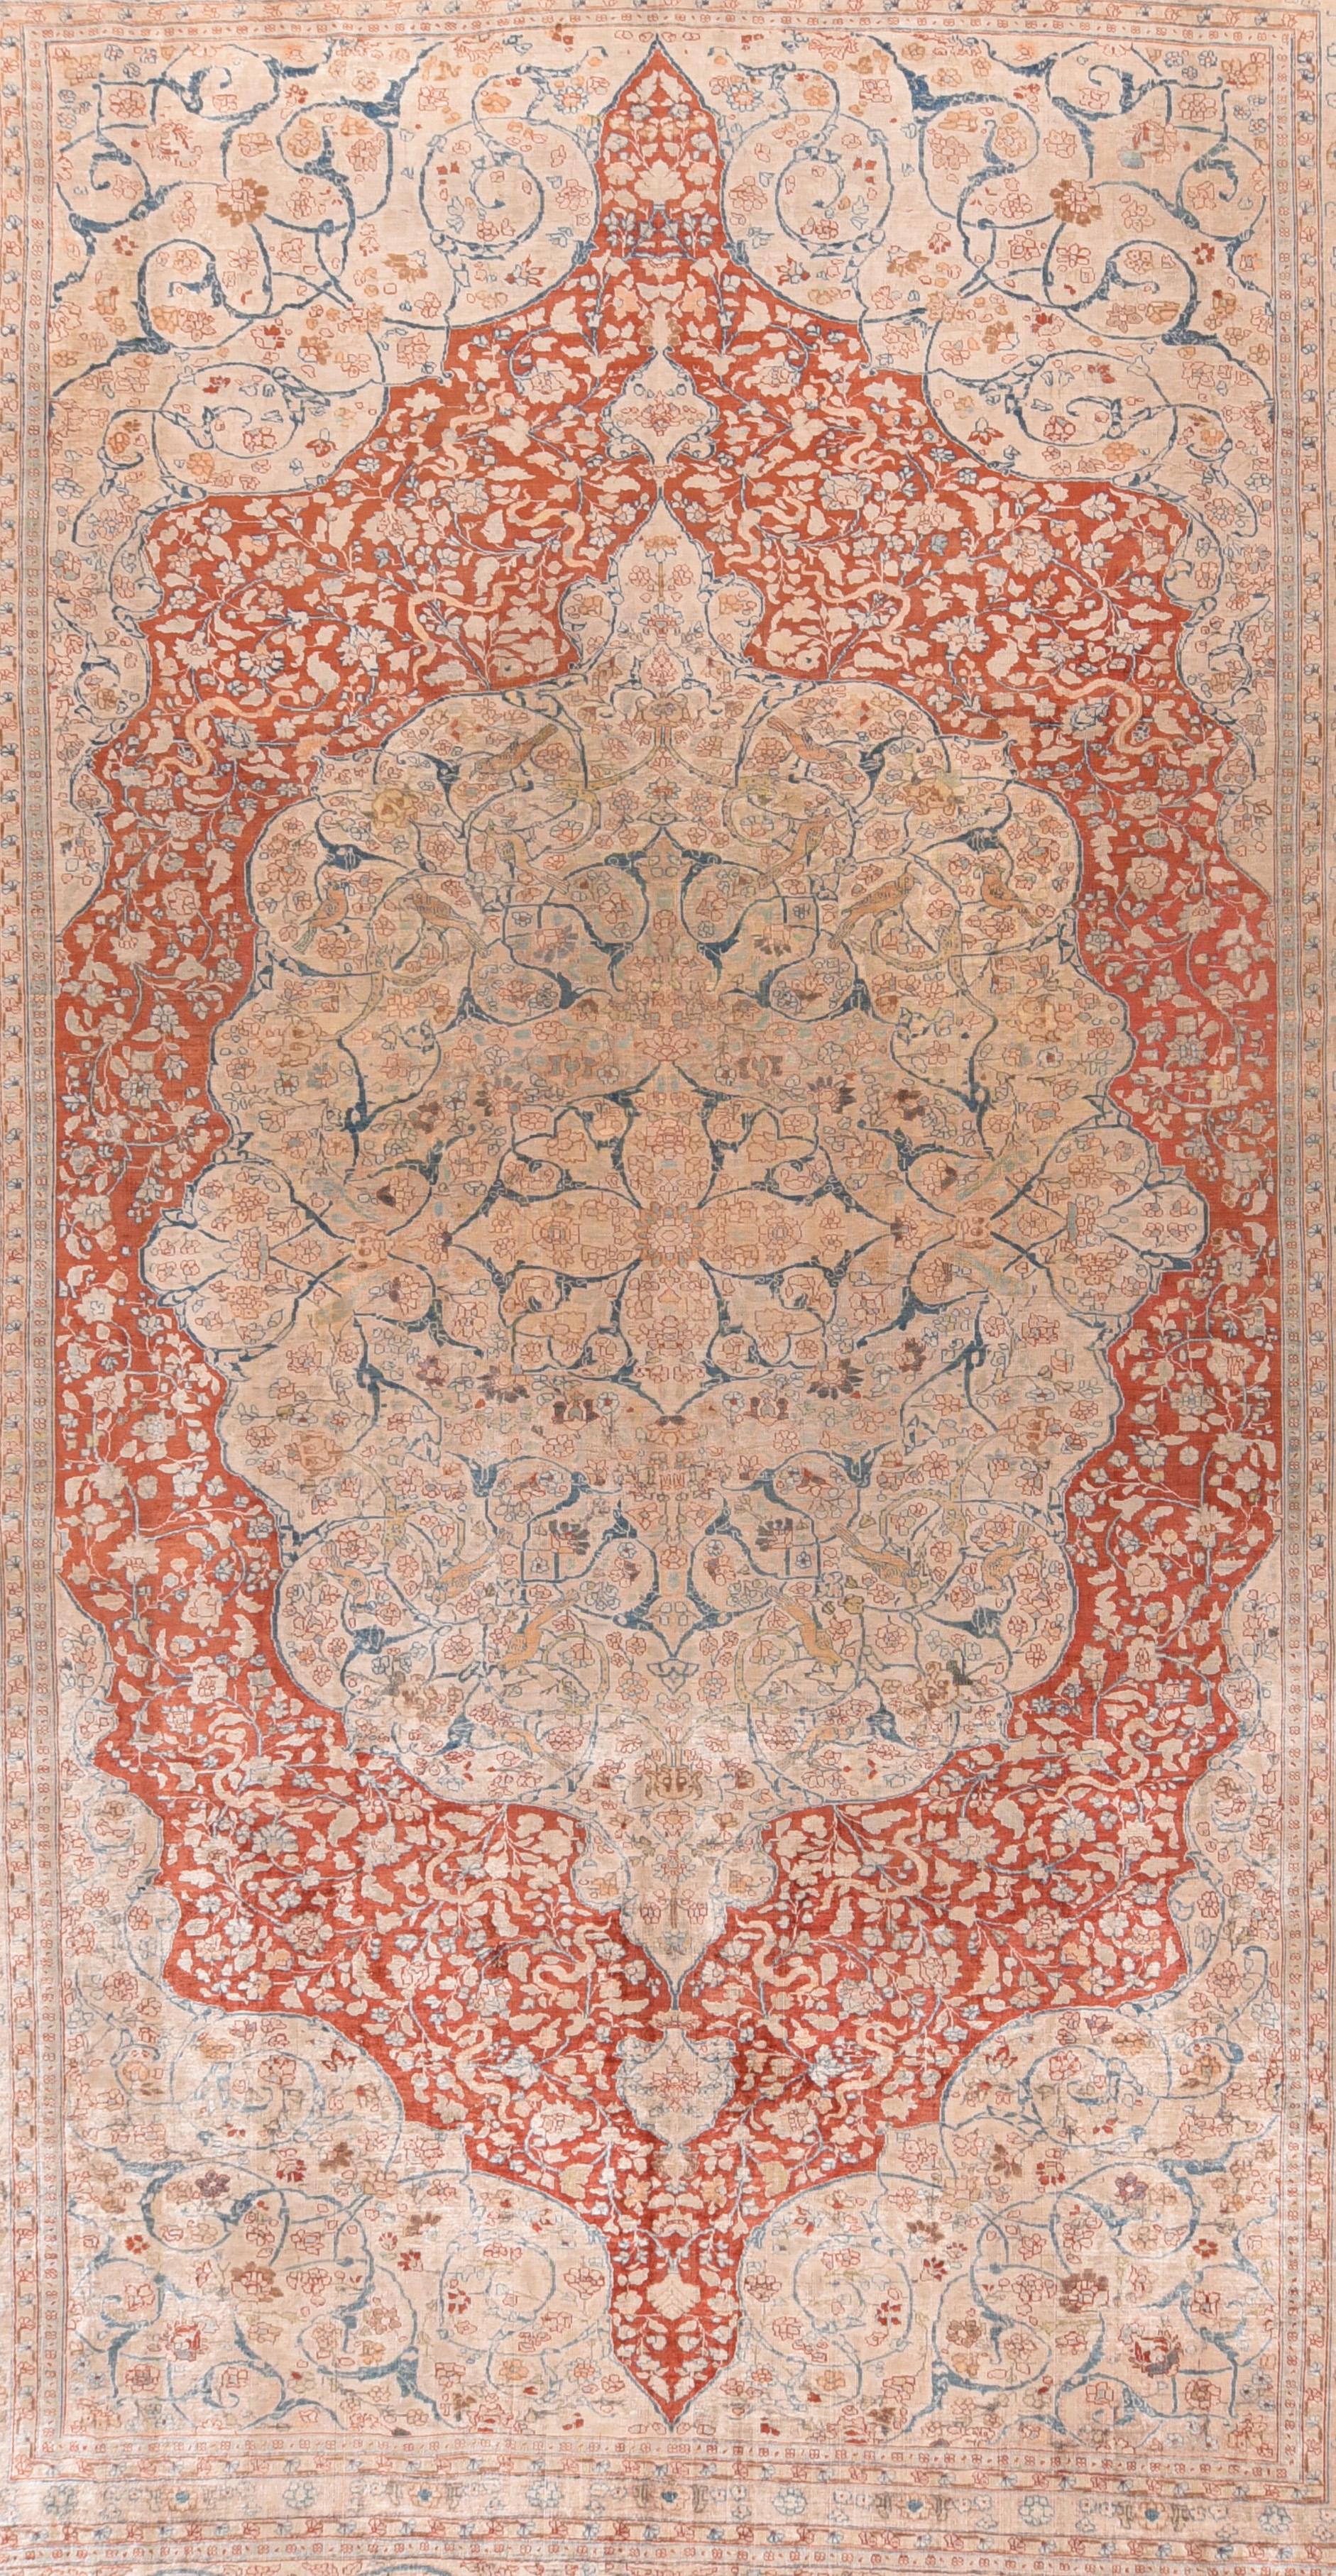 A Tabriz rug/carpet is a type in the general category of Persian carpets[1][2][3] from the city of Tabriz, the capital city of East Azarbaijan Province in north west of Iran totally populated by Azerbaijanis. It is one of the oldest rug weaving